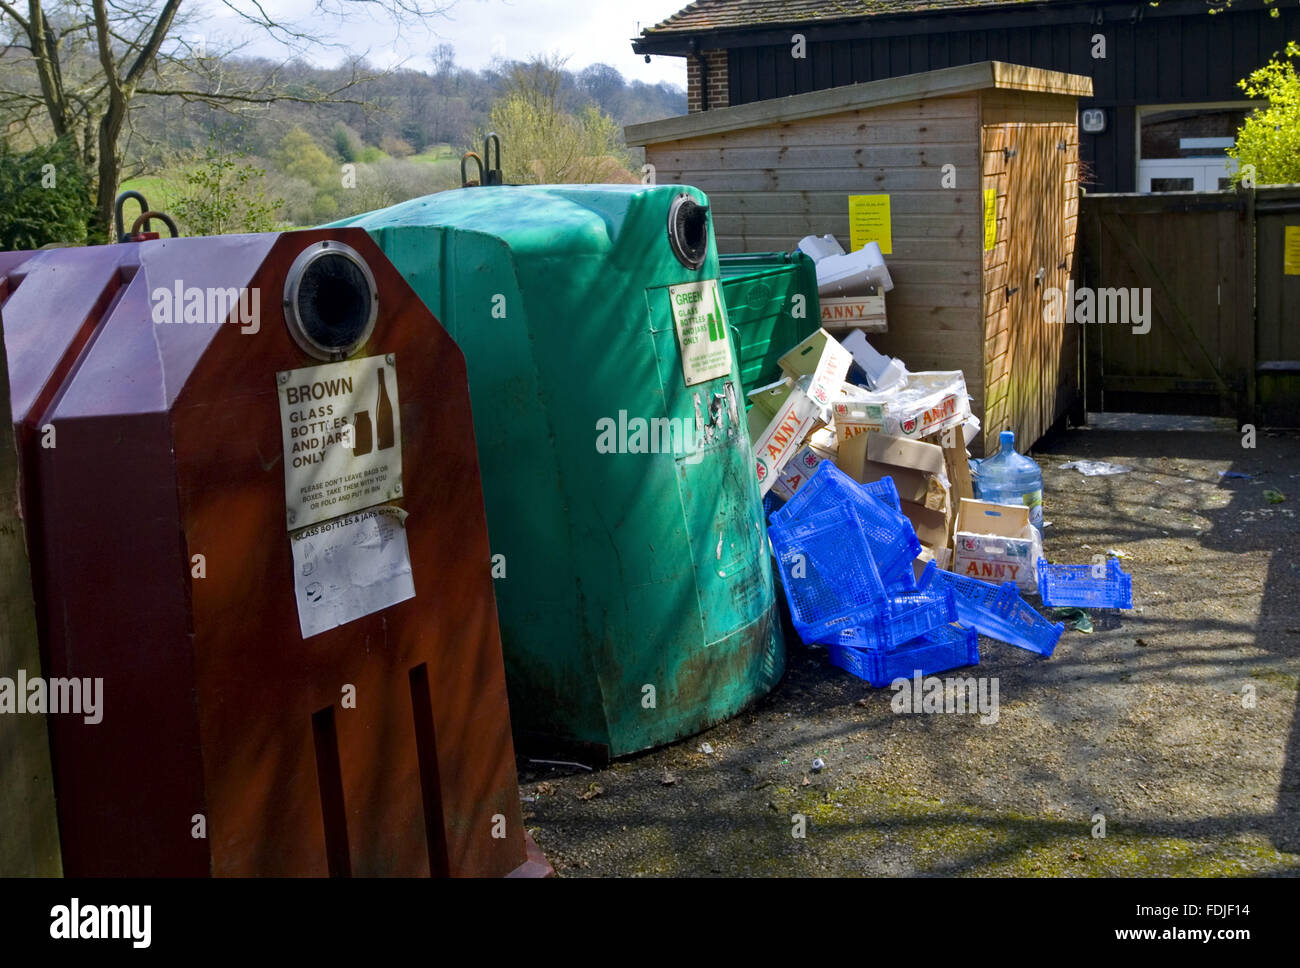 Recycling-Behälter in Chartwell, Kent. Stockfoto